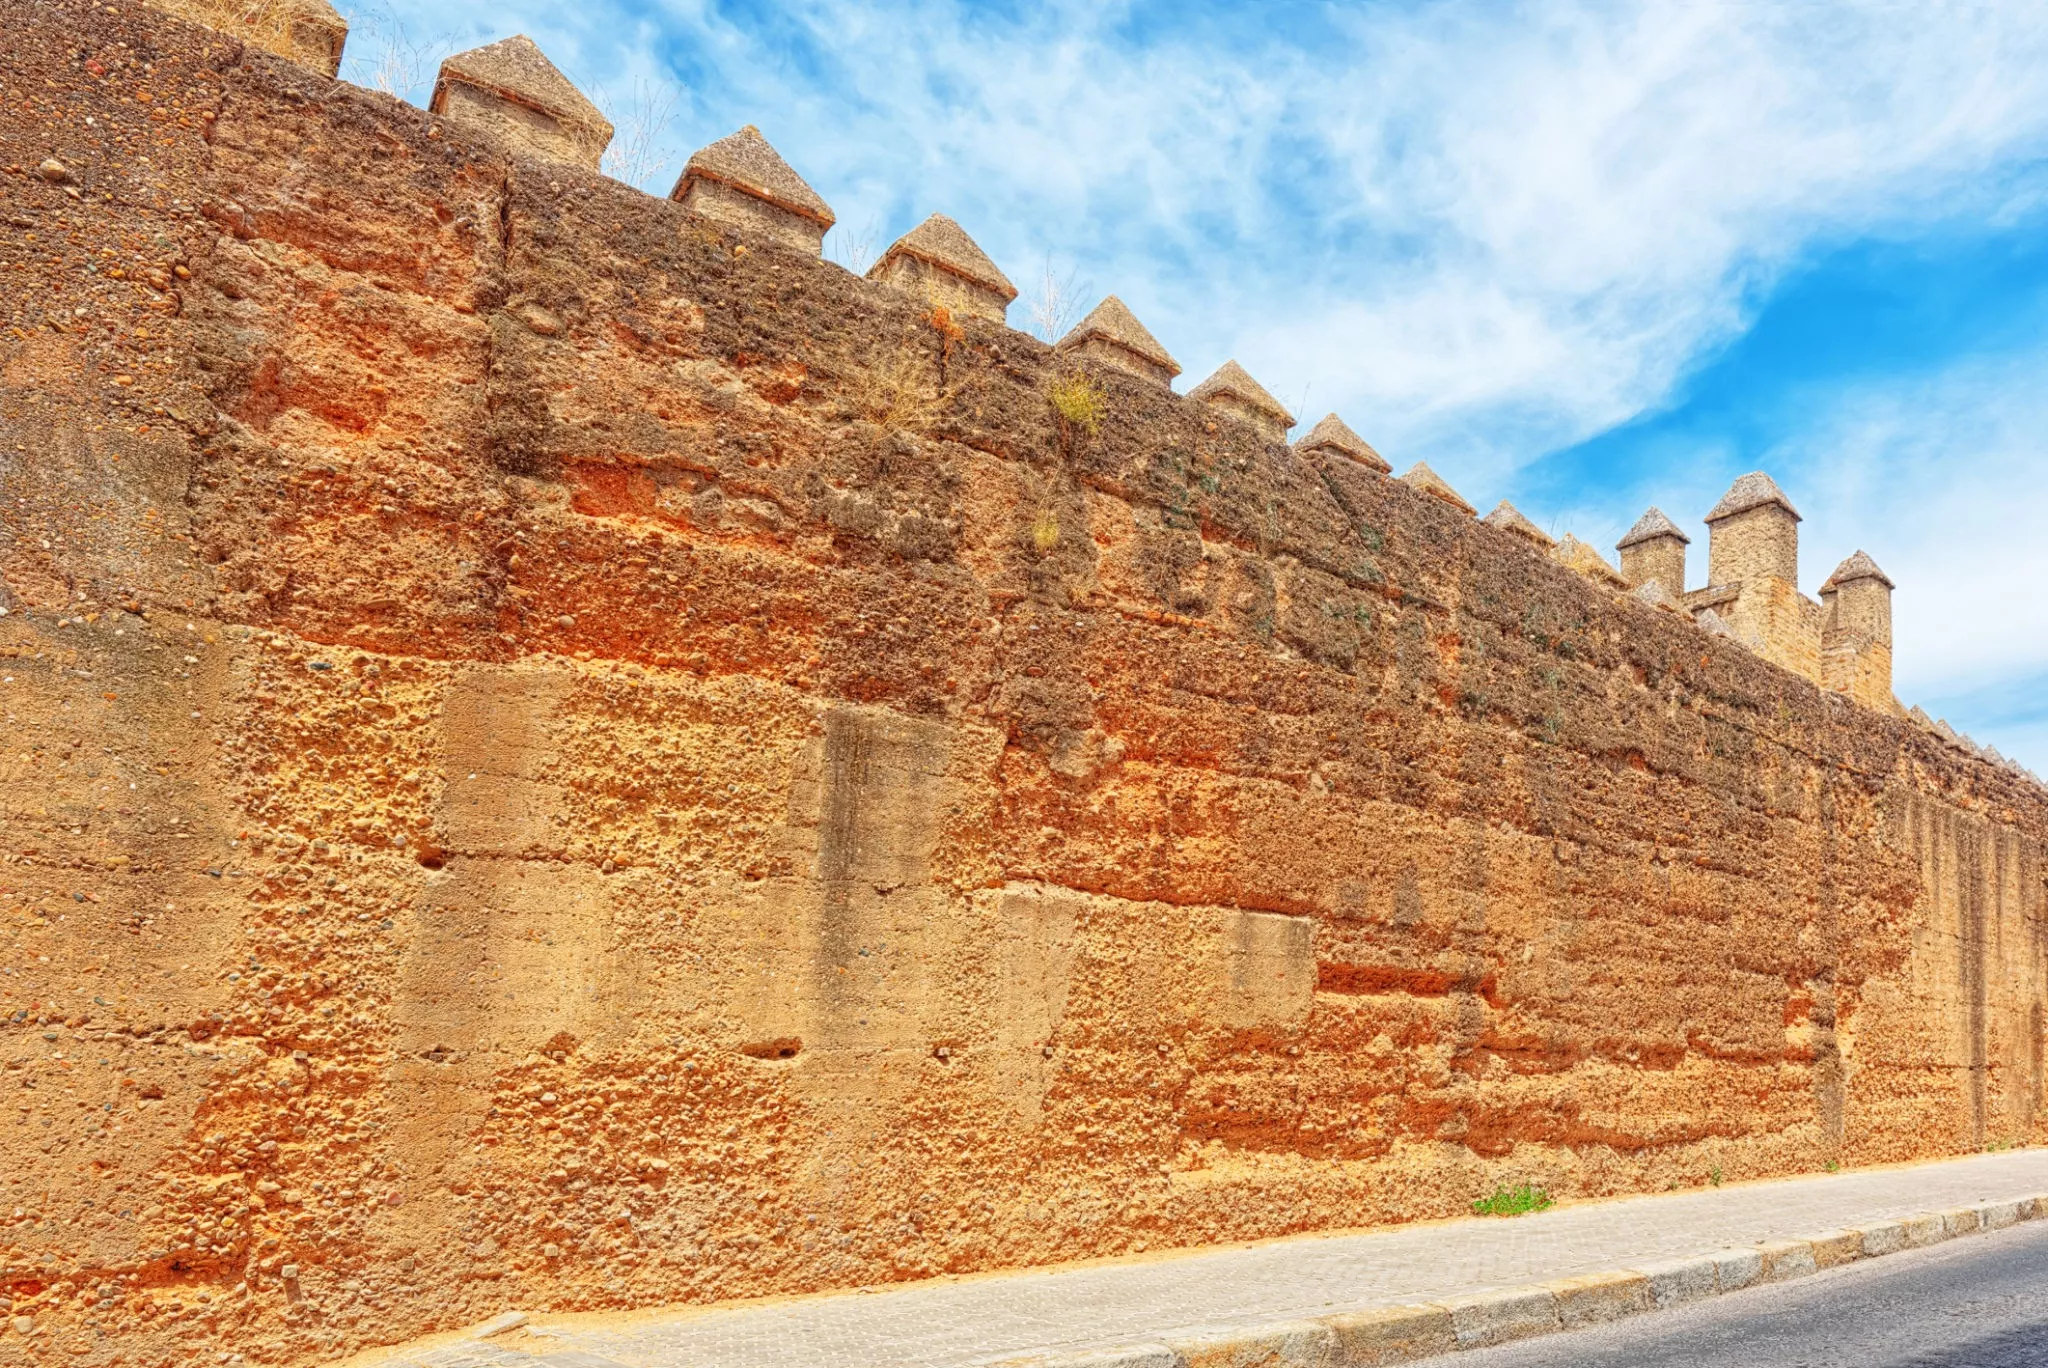 Seville Walls in Spain, Europe | Architecture - Rated 3.5